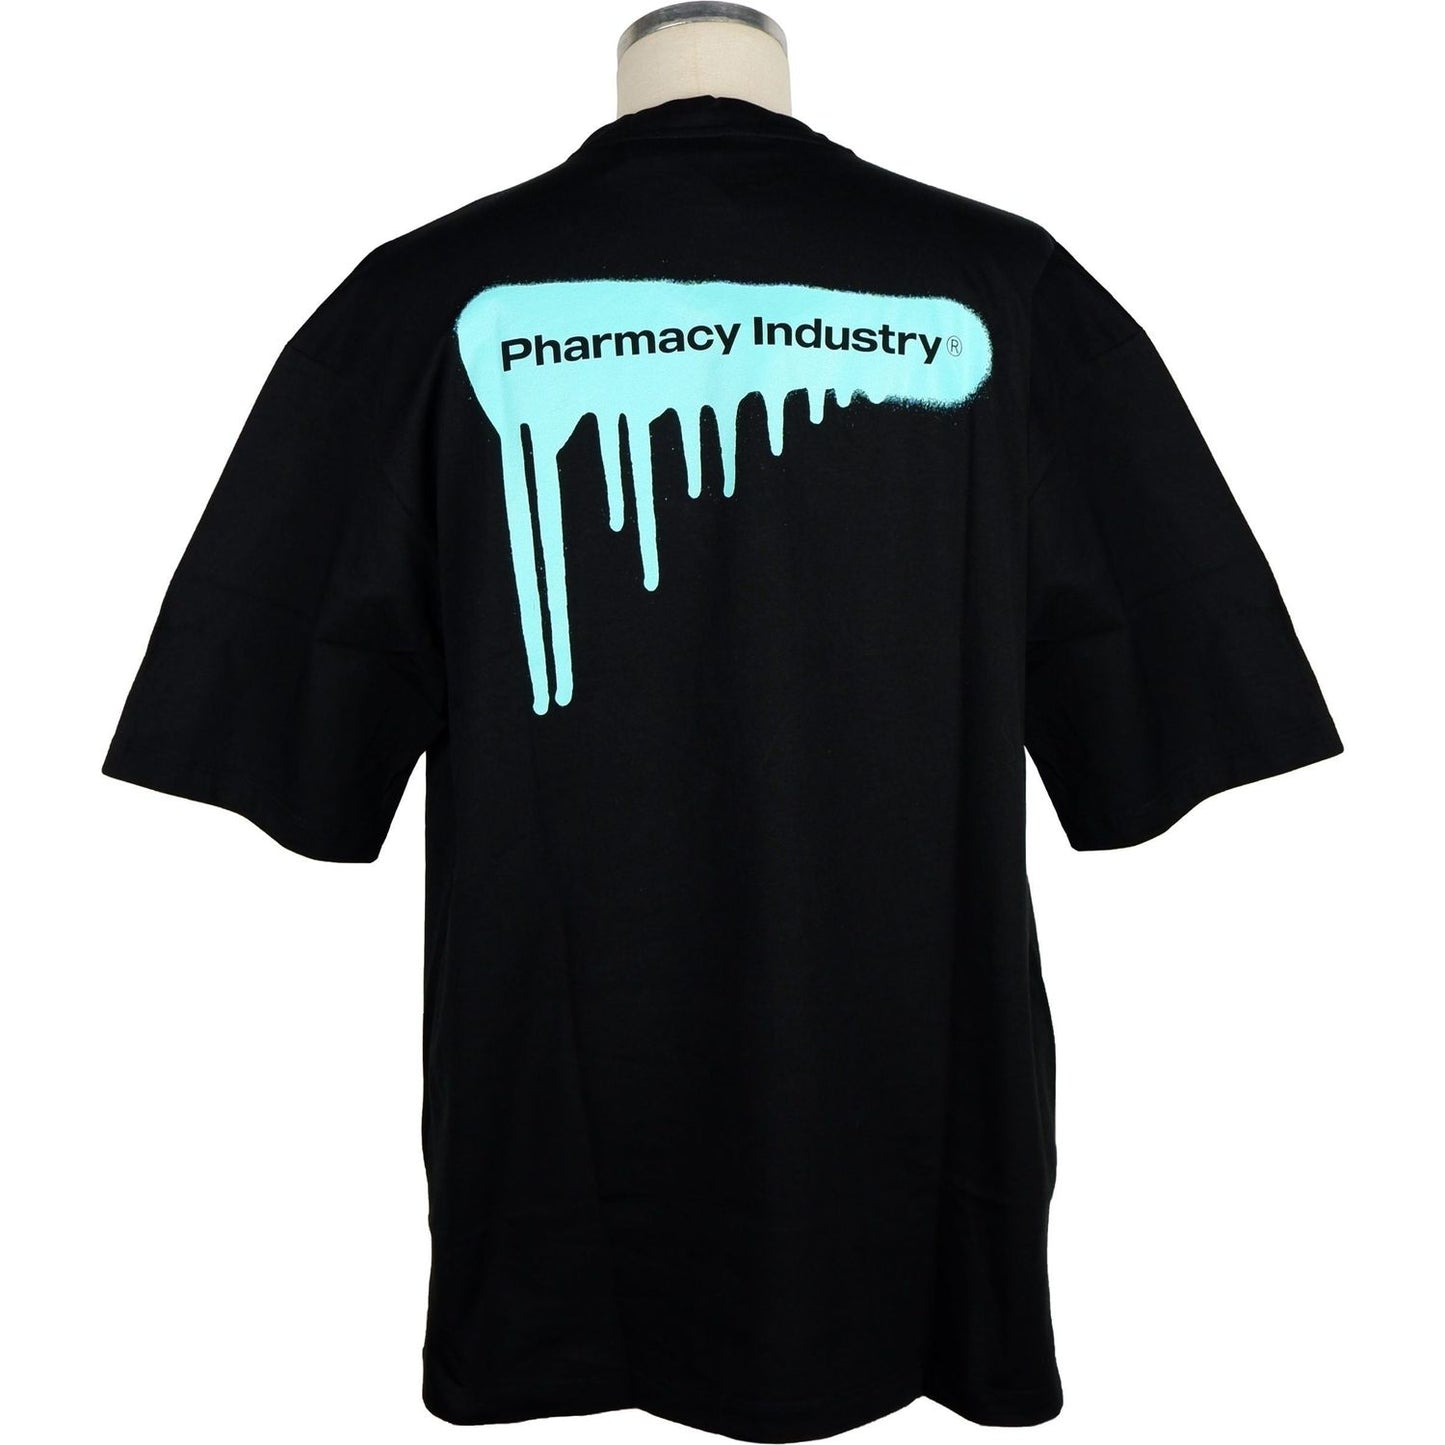 Pharmacy Industry Elevated Casual Black Crewneck Tee black-cotton-t-shirt-31 product-8556-416657304-scaled-38f28746-3bf.jpg